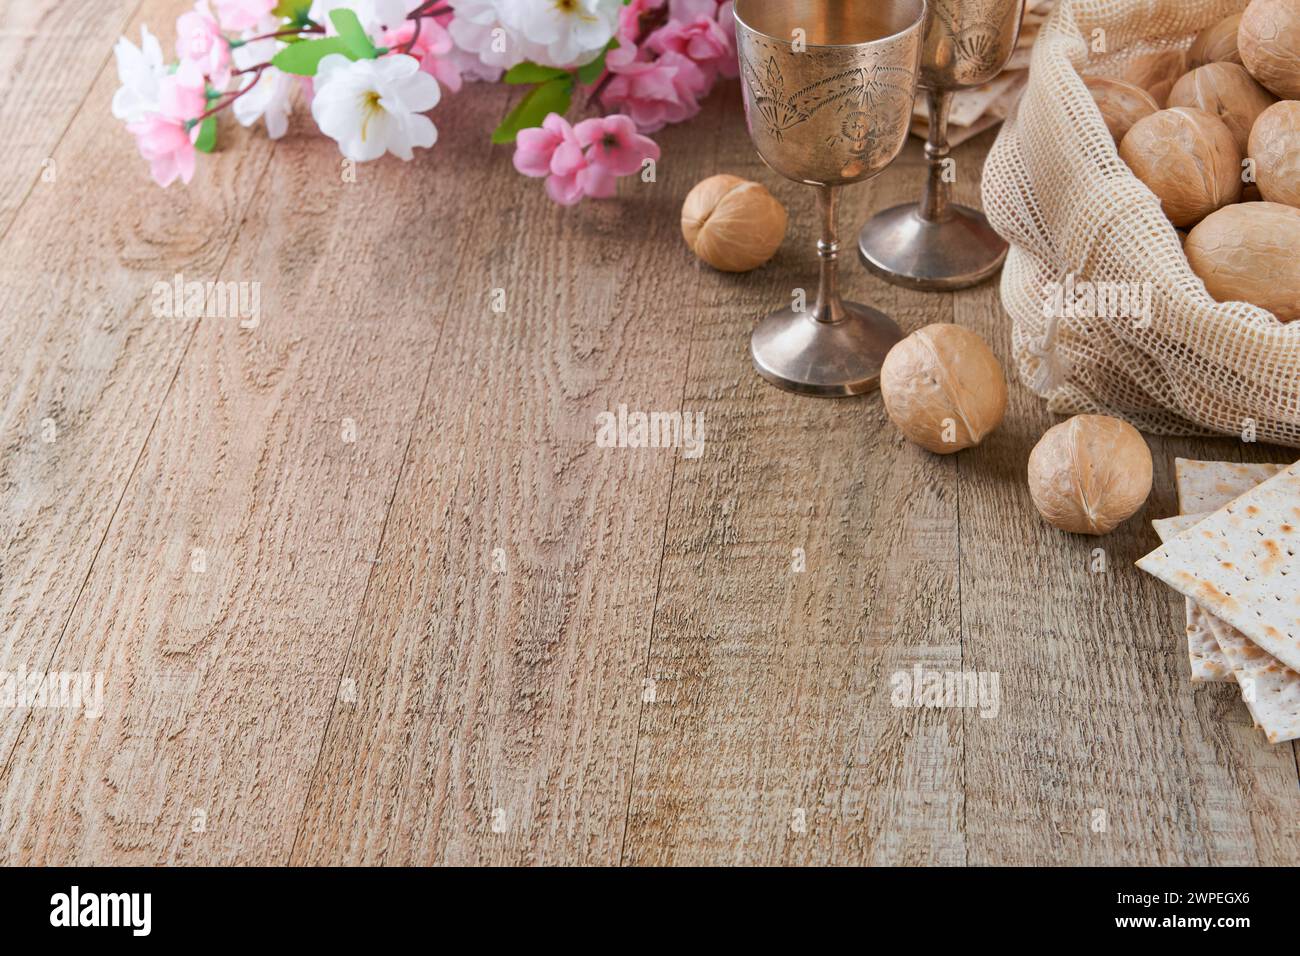 Passover celebration concept. Matzah, red kosher and walnut on wooden vintage table table in front of spring blossom tree garden and flowers landscape Stock Photo